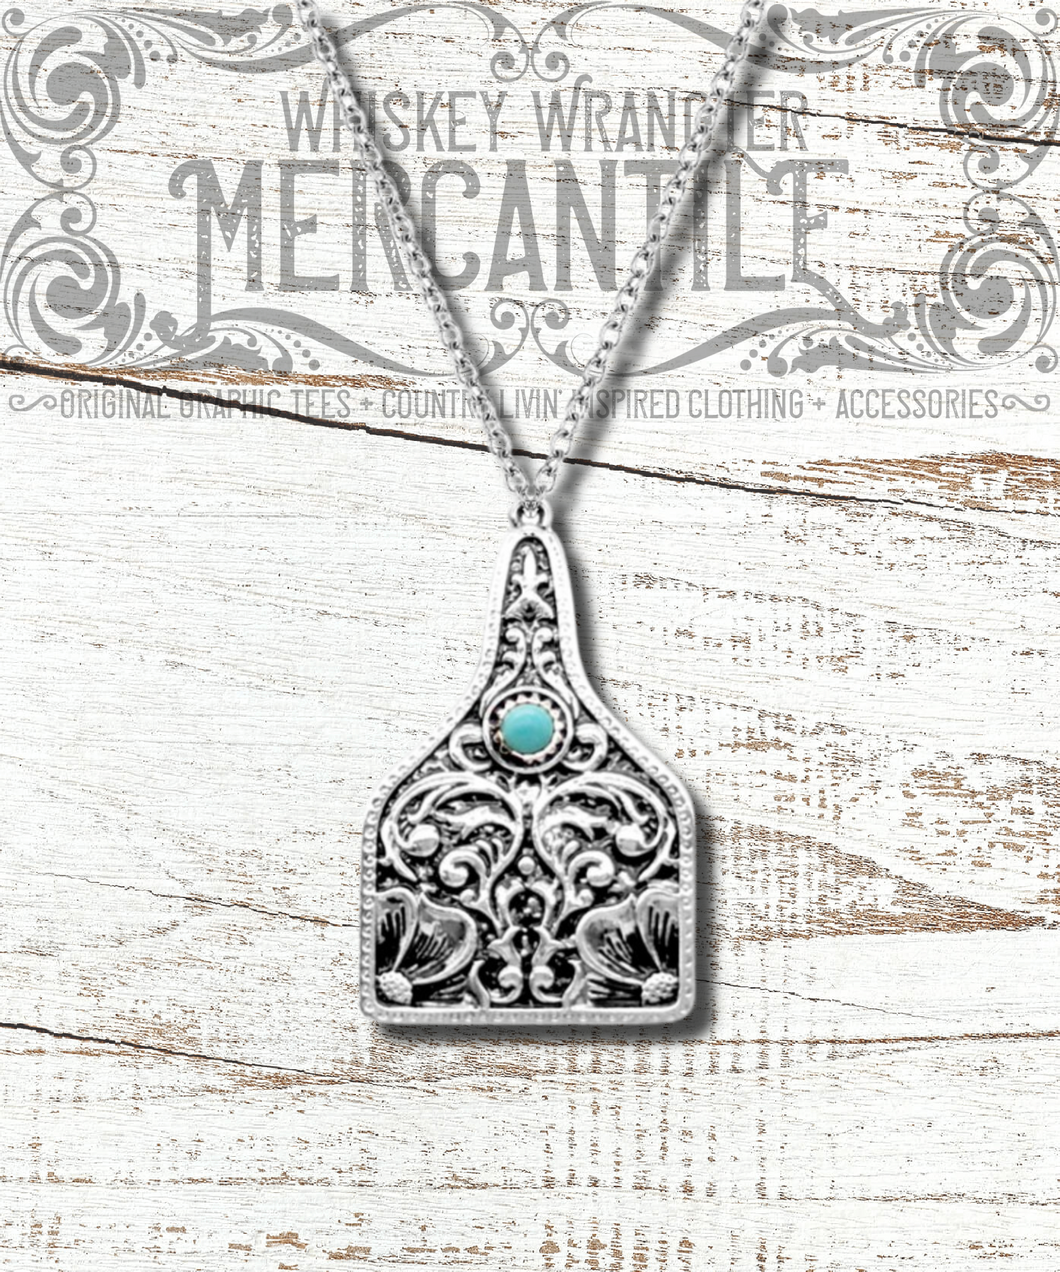 PAISLEY TEXTURE CATTLE TAG GEMSTONE NECKLACE